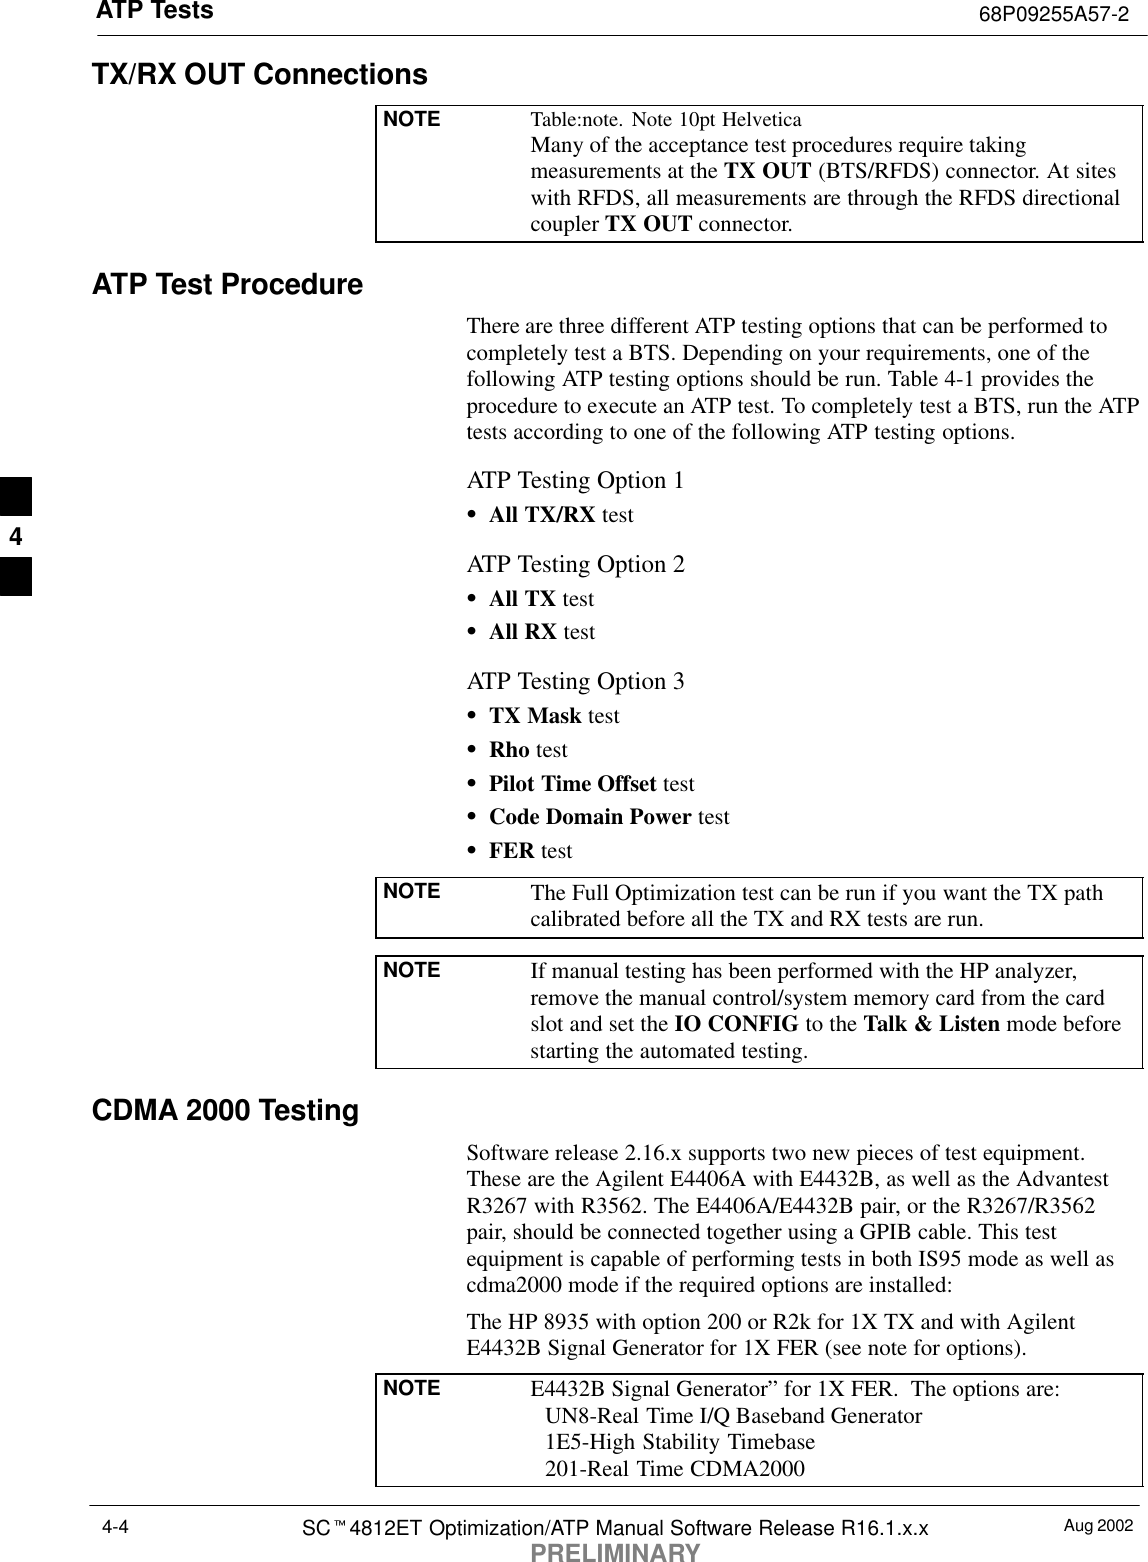 ATP Tests 68P09255A57-2Aug 2002SCt4812ET Optimization/ATP Manual Software Release R16.1.x.xPRELIMINARY4-4TX/RX OUT ConnectionsNOTE Table:note. Note 10pt HelveticaMany of the acceptance test procedures require takingmeasurements at the TX OUT (BTS/RFDS) connector. At siteswith RFDS, all measurements are through the RFDS directionalcoupler TX OUT connector.ATP Test ProcedureThere are three different ATP testing options that can be performed tocompletely test a BTS. Depending on your requirements, one of thefollowing ATP testing options should be run. Table 4-1 provides theprocedure to execute an ATP test. To completely test a BTS, run the ATPtests according to one of the following ATP testing options.ATP Testing Option 1SAll TX/RX testATP Testing Option 2SAll TX testSAll RX testATP Testing Option 3STX Mask testSRho testSPilot Time Offset testSCode Domain Power testSFER testNOTE The Full Optimization test can be run if you want the TX pathcalibrated before all the TX and RX tests are run.NOTE If manual testing has been performed with the HP analyzer,remove the manual control/system memory card from the cardslot and set the IO CONFIG to the Talk &amp; Listen mode beforestarting the automated testing.CDMA 2000 TestingSoftware release 2.16.x supports two new pieces of test equipment.These are the Agilent E4406A with E4432B, as well as the AdvantestR3267 with R3562. The E4406A/E4432B pair, or the R3267/R3562pair, should be connected together using a GPIB cable. This testequipment is capable of performing tests in both IS95 mode as well ascdma2000 mode if the required options are installed:The HP 8935 with option 200 or R2k for 1X TX and with AgilentE4432B Signal Generator for 1X FER (see note for options).NOTE E4432B Signal Generator” for 1X FER.  The options are:  UN8-Real Time I/Q Baseband Generator  1E5-High Stability Timebase  201-Real Time CDMA20004